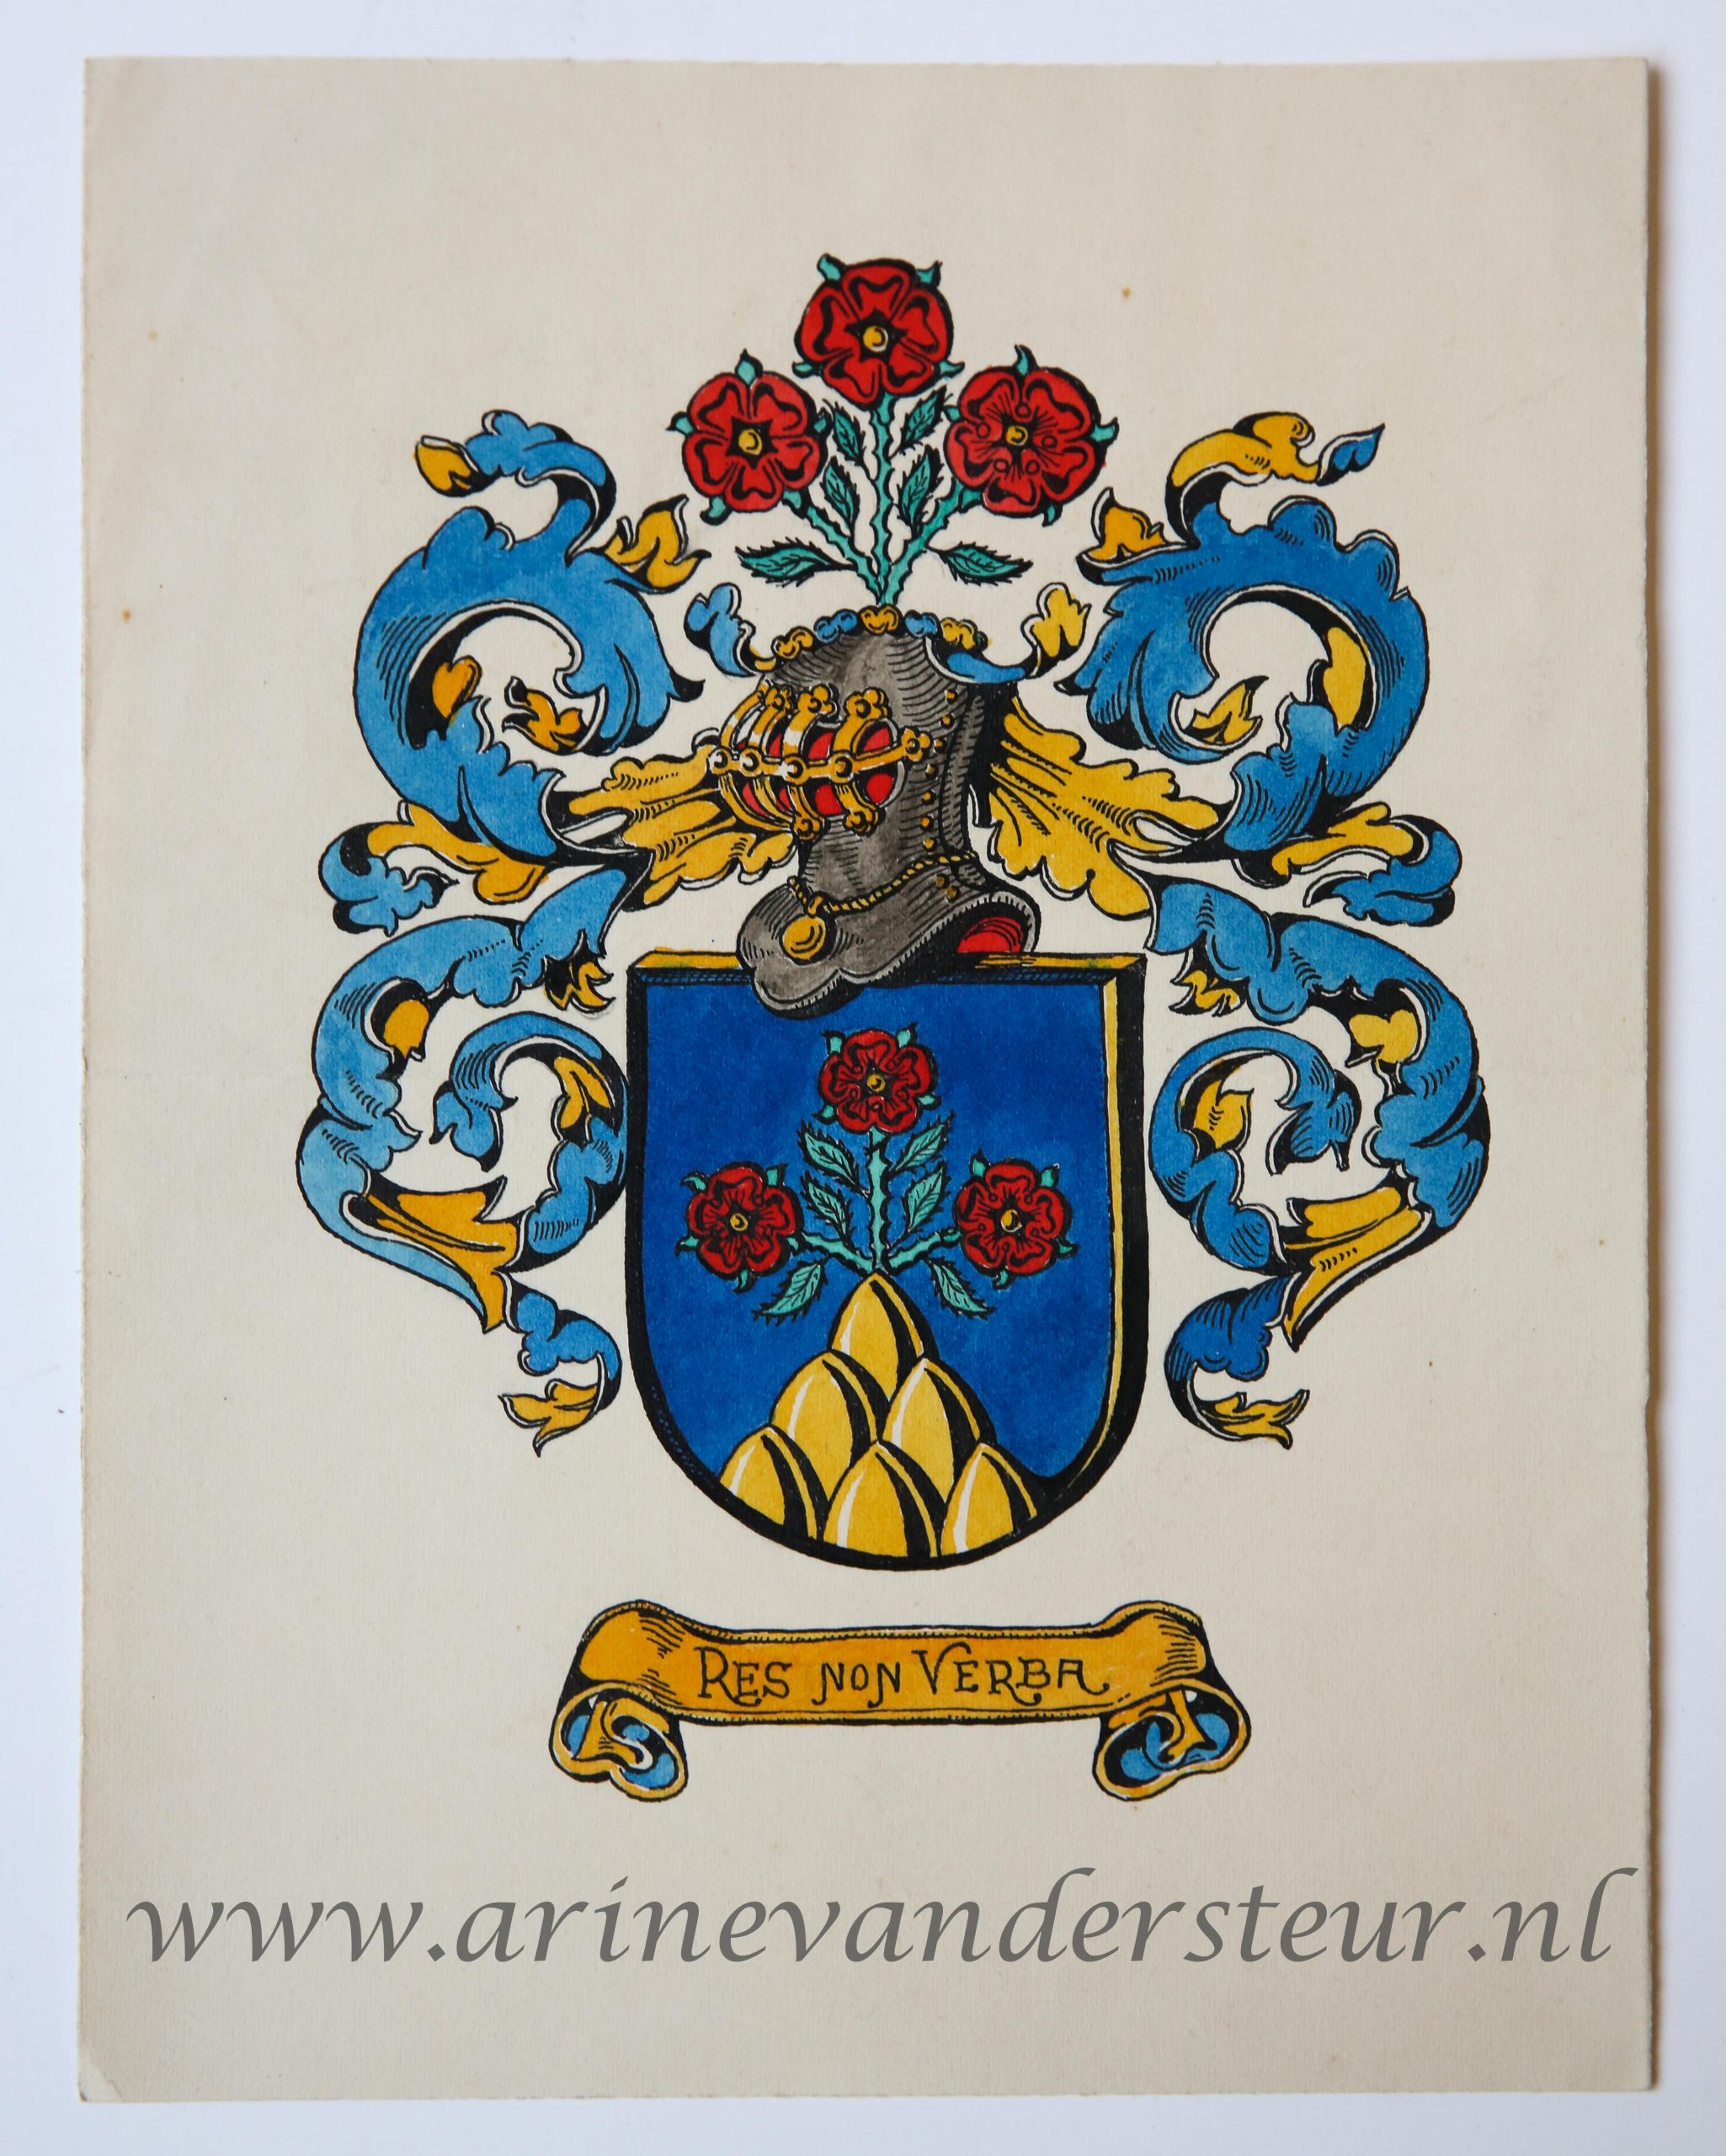 [Familiewapens] - Wapenkaart/Coat of Arms in blue, red and yellow. With the text: Res Non Verba.